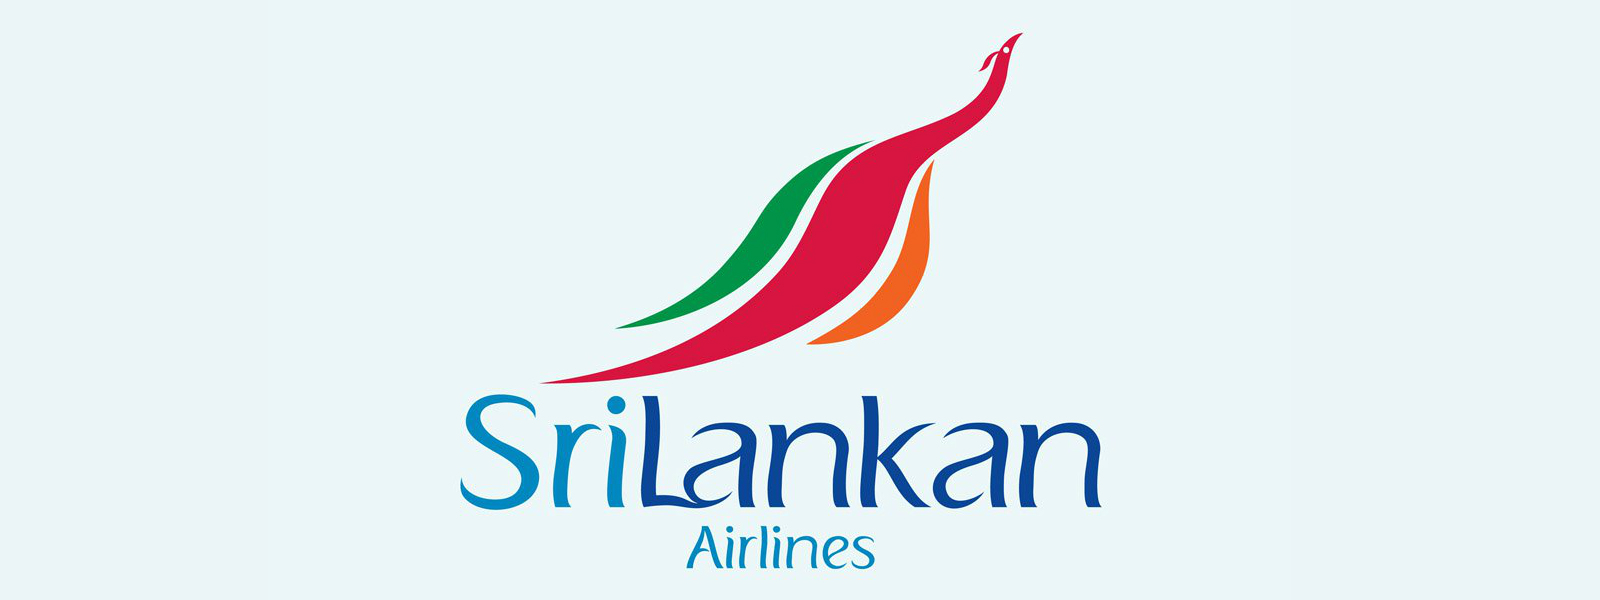 New Chairman and Board of Directors for SriLankan